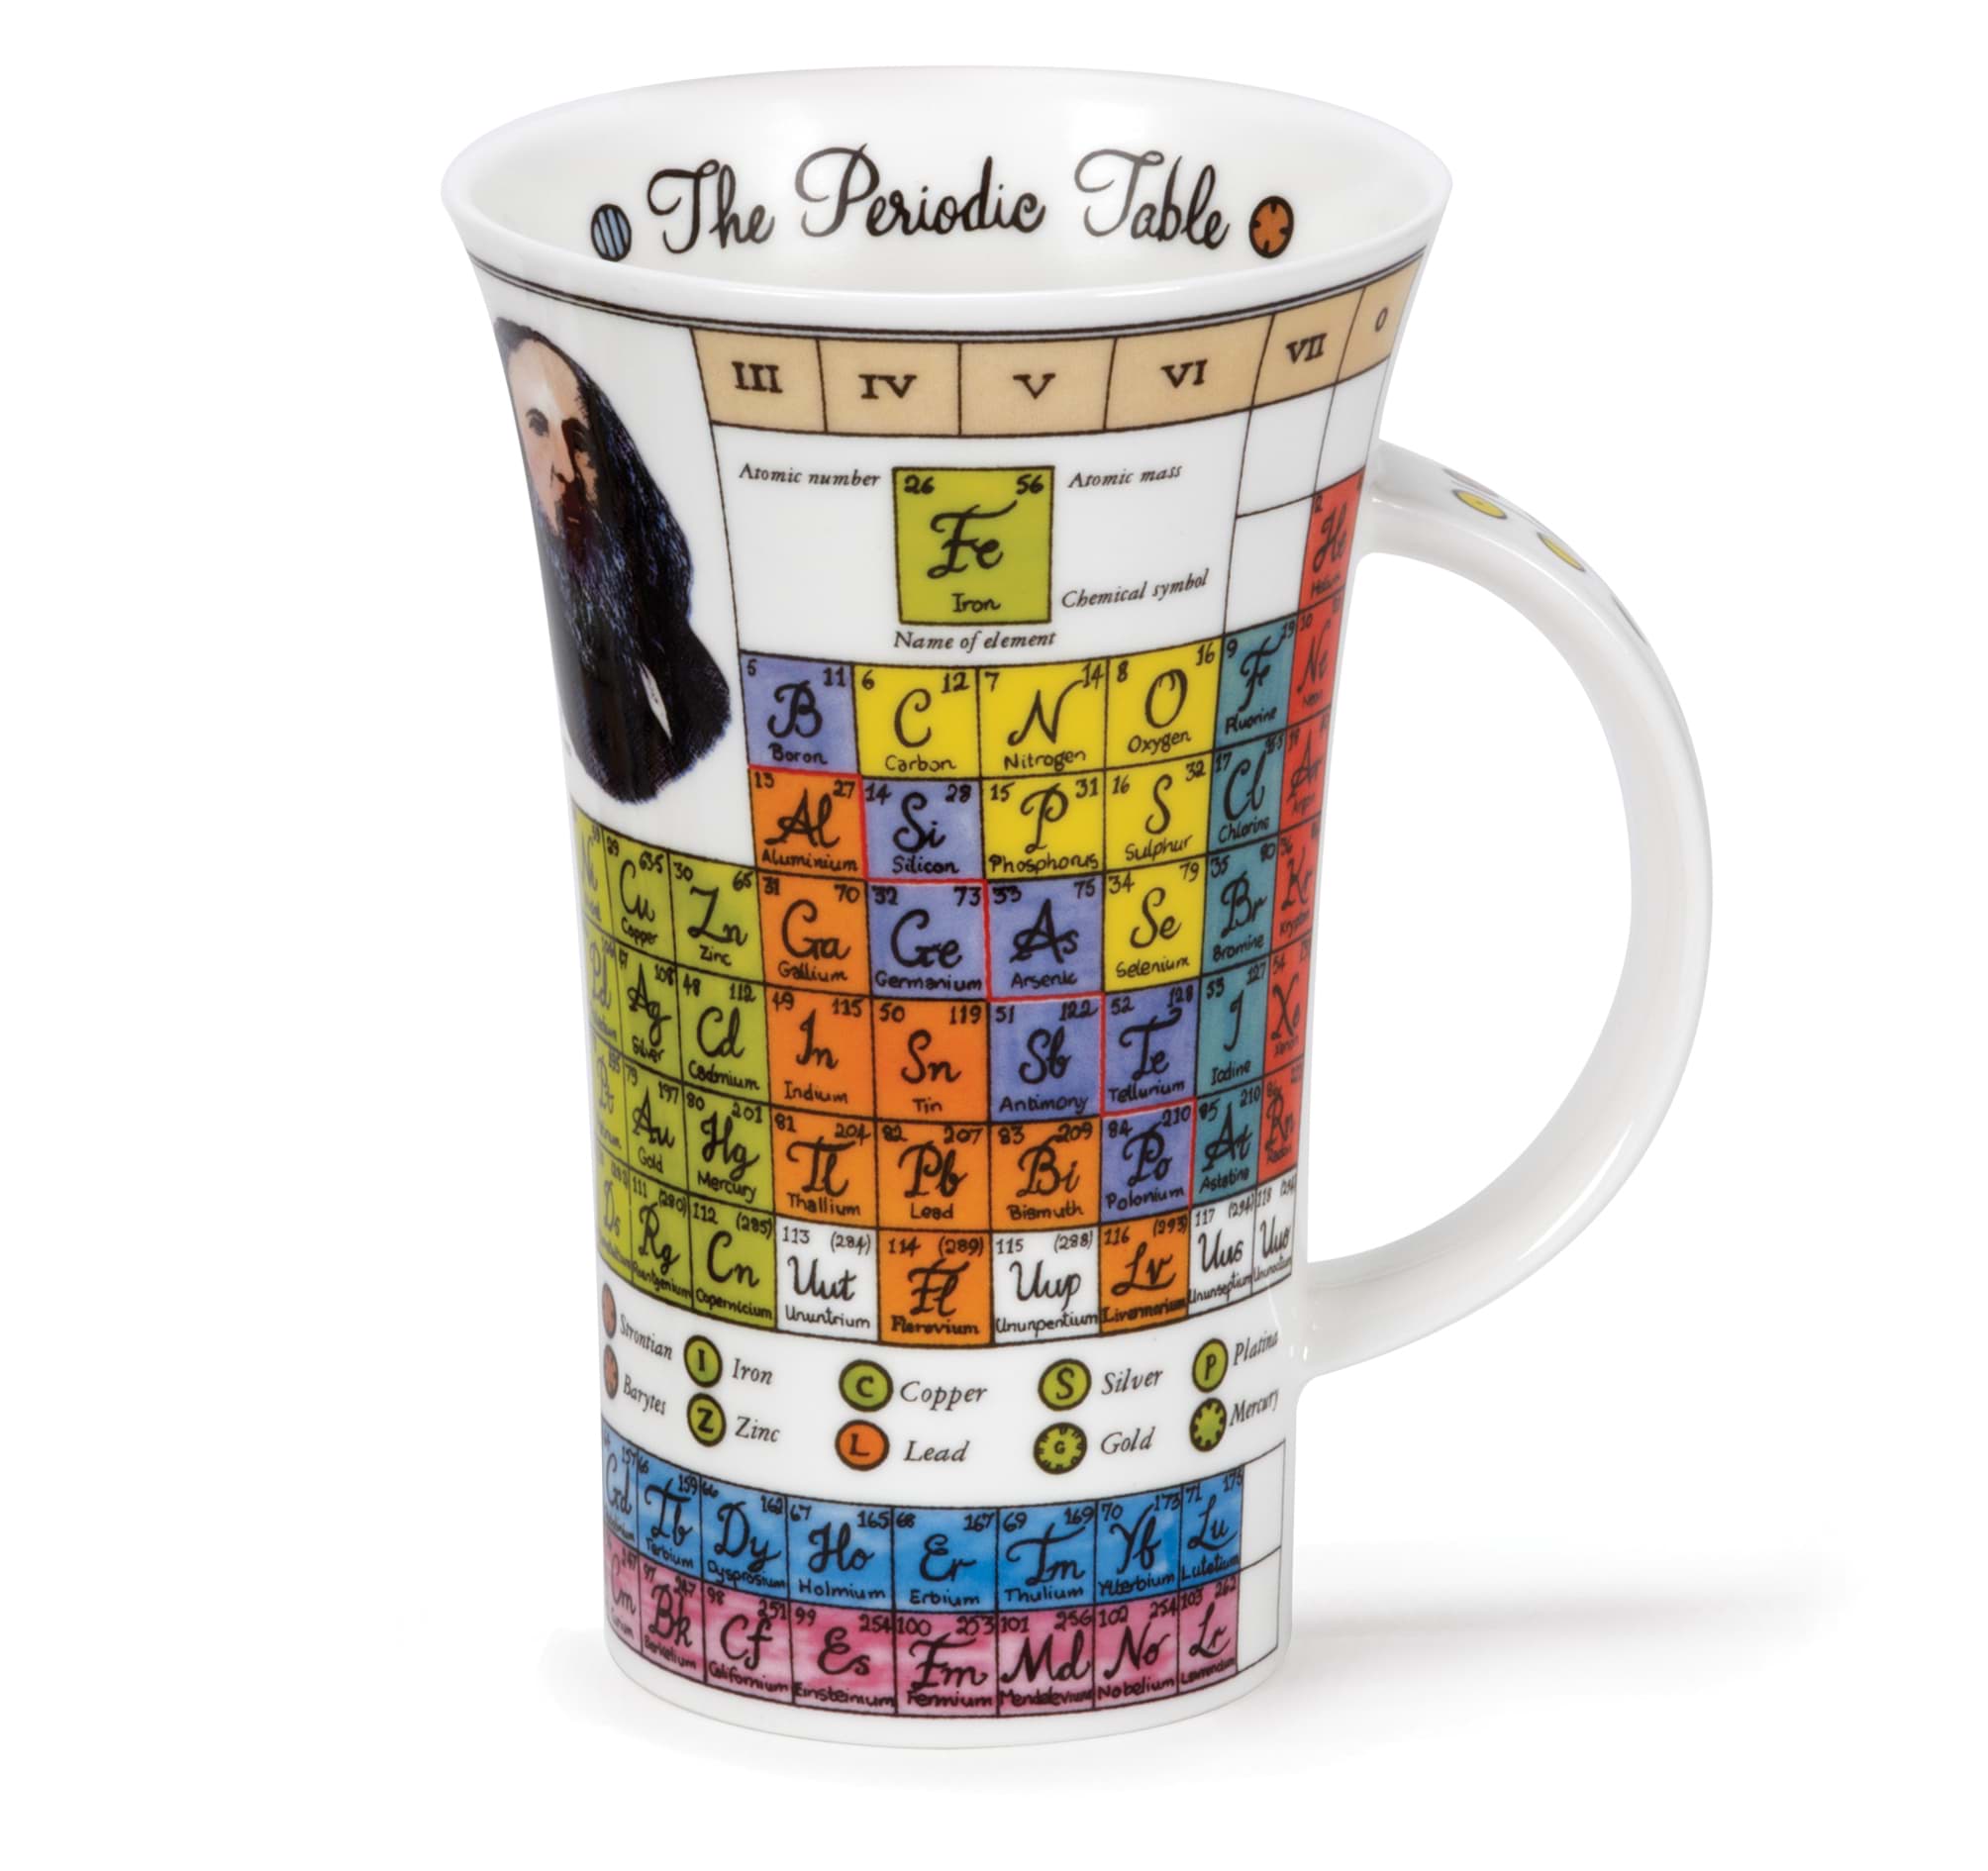 Picture of Dunoon Glencoe The Periodic Table by Jane Goodwin